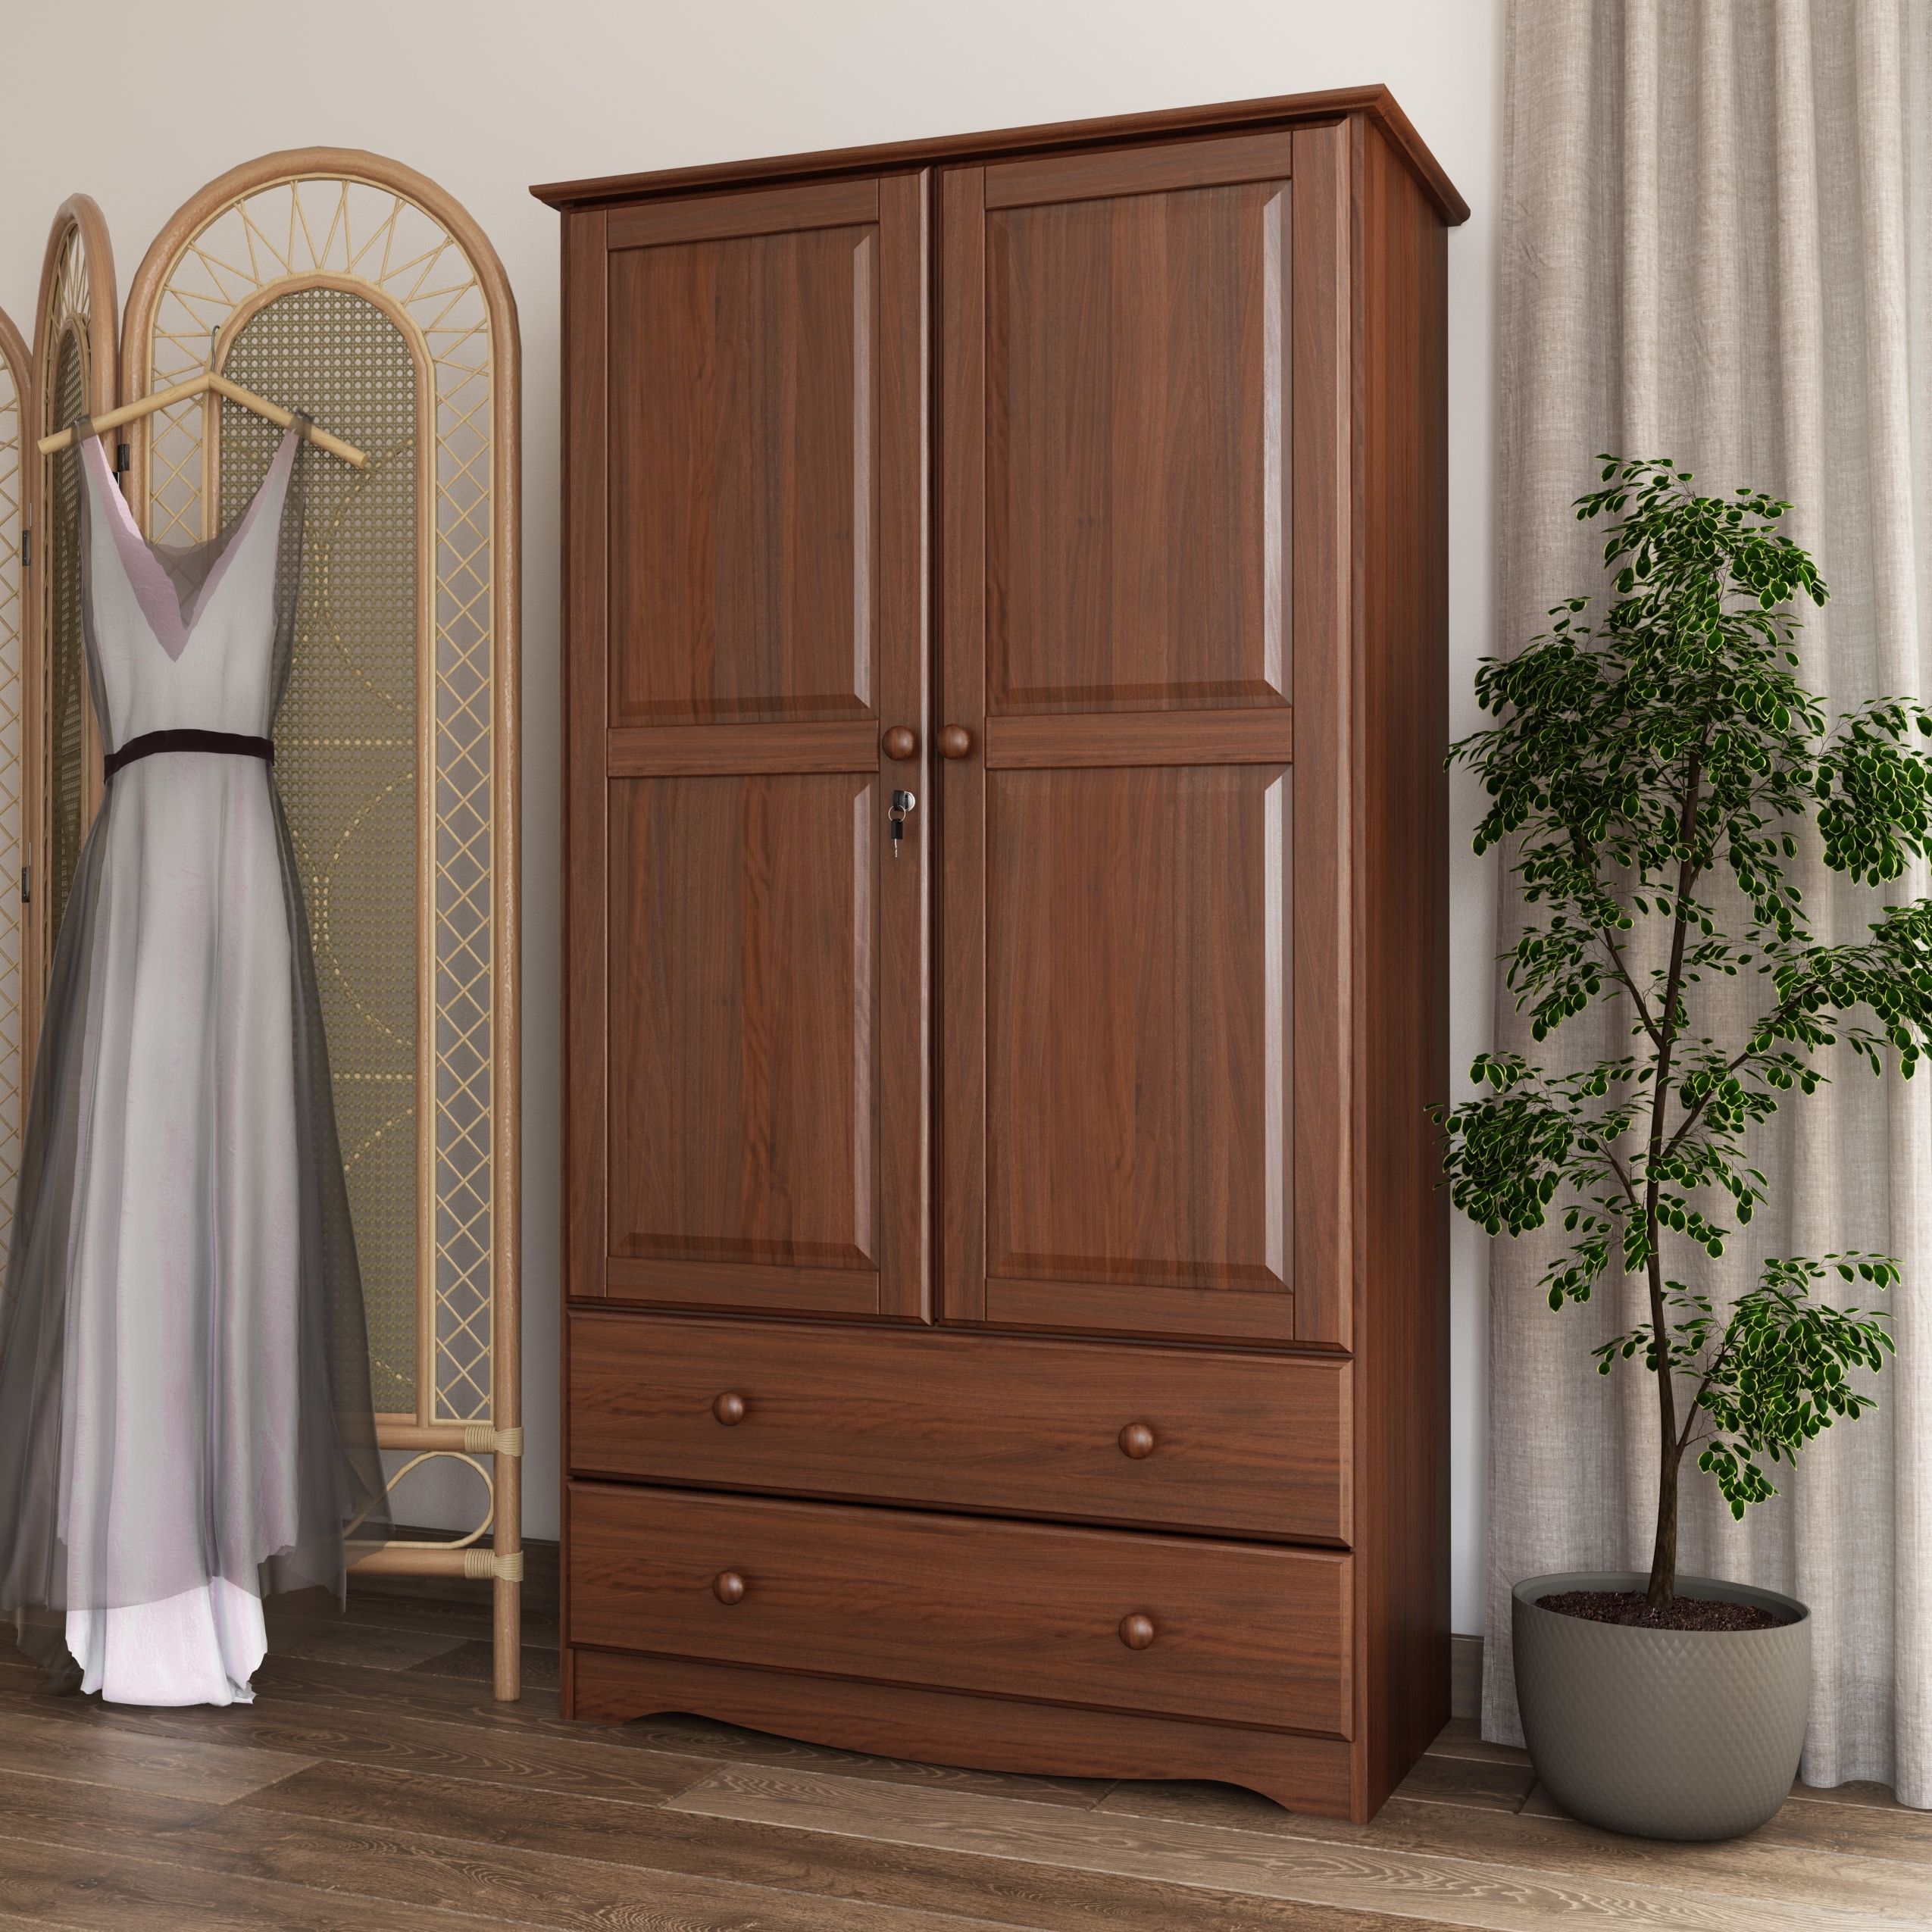 Palace Imports 100% Solid Wood Smart Wardrobe Armoire With 2 Drawers – Bed  Bath & Beyond – 12096940 Inside Single Oak Wardrobes With Drawers (View 16 of 20)